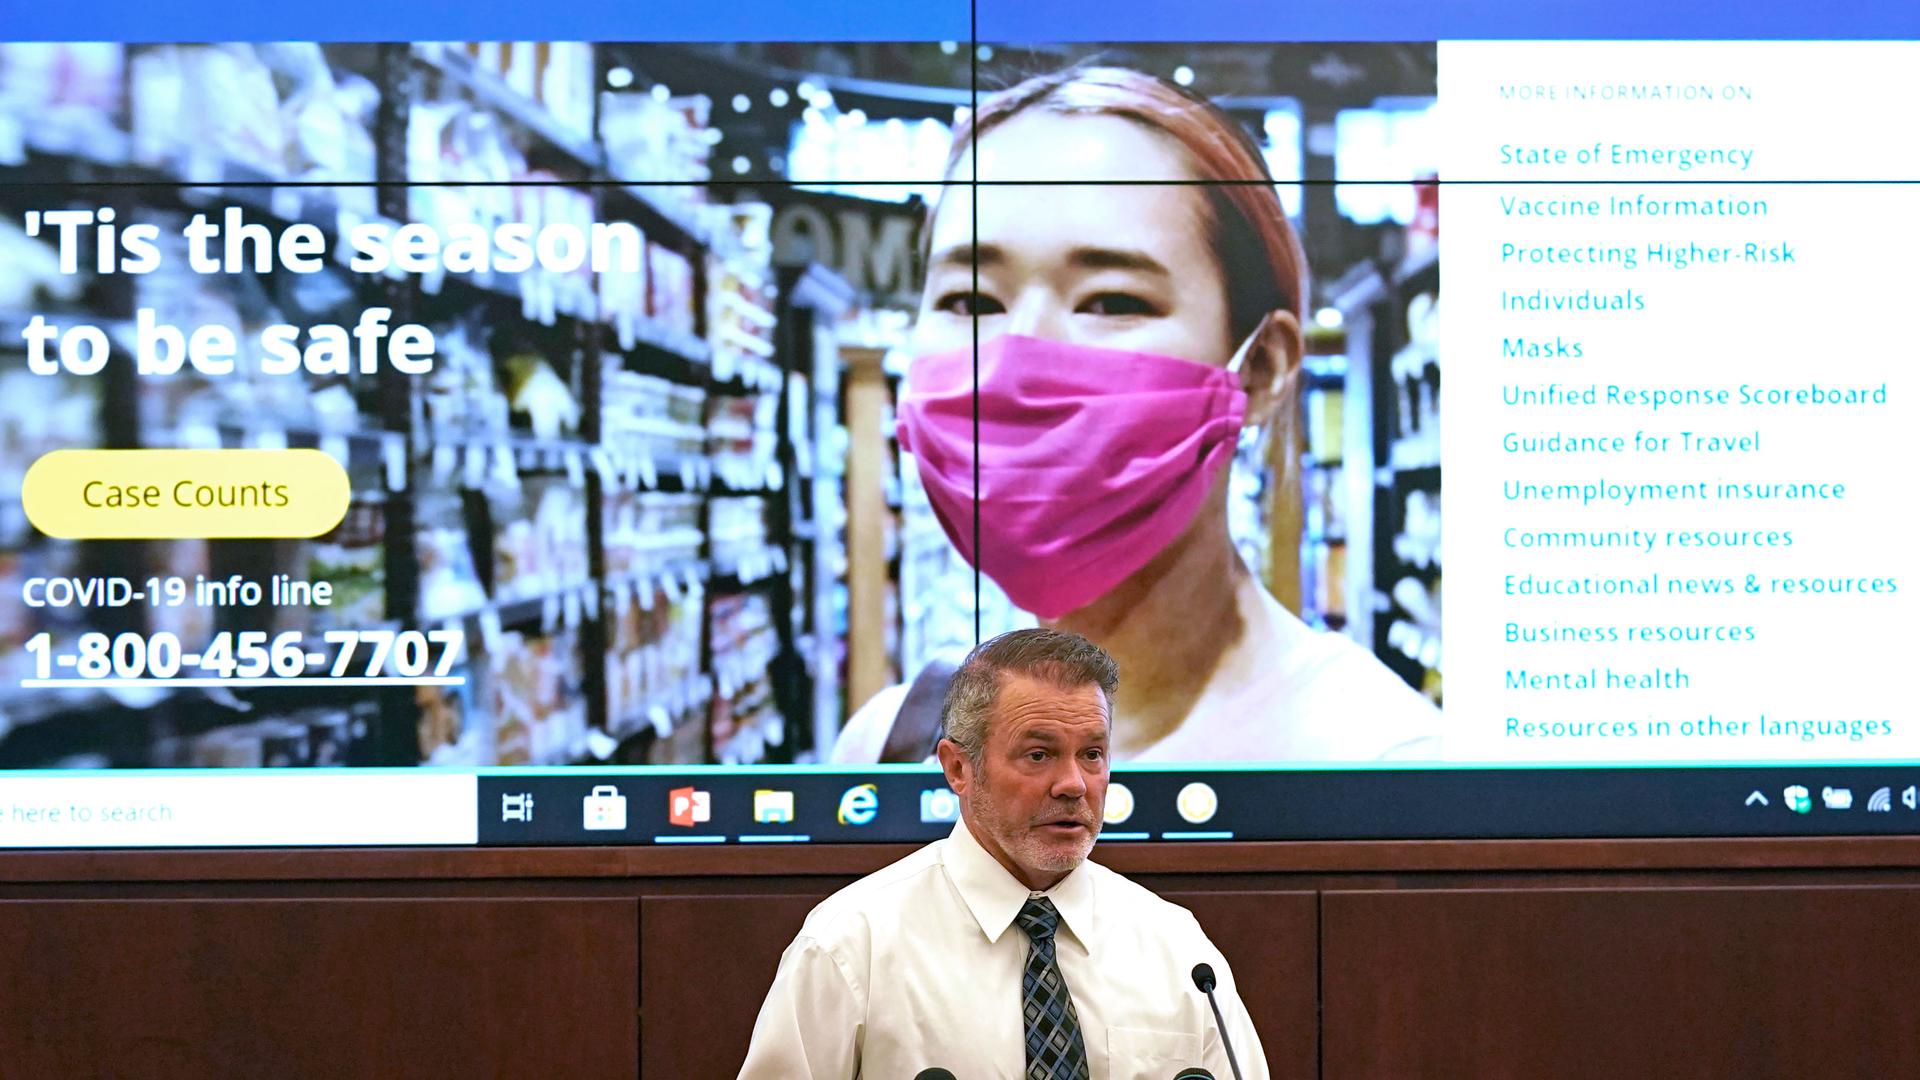 A man wearing a white shirt and gray tie is shown speaking a t podium with a screen behind him showing promotional material on coronavirus safety.